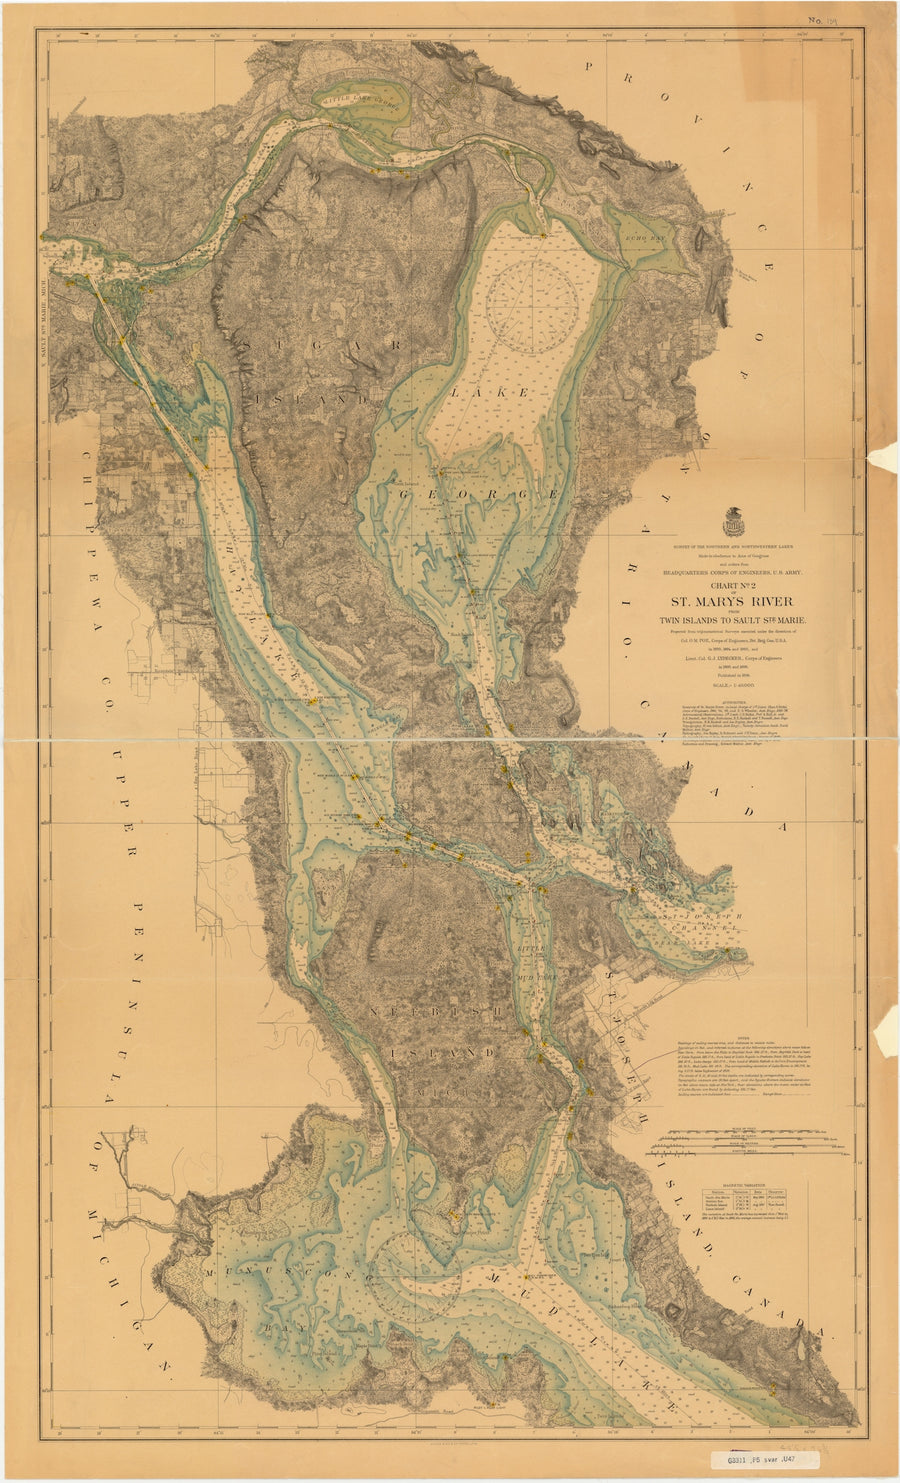 St. Mary's River - Twin Islands to Sault Ste. Marie Map - 1895